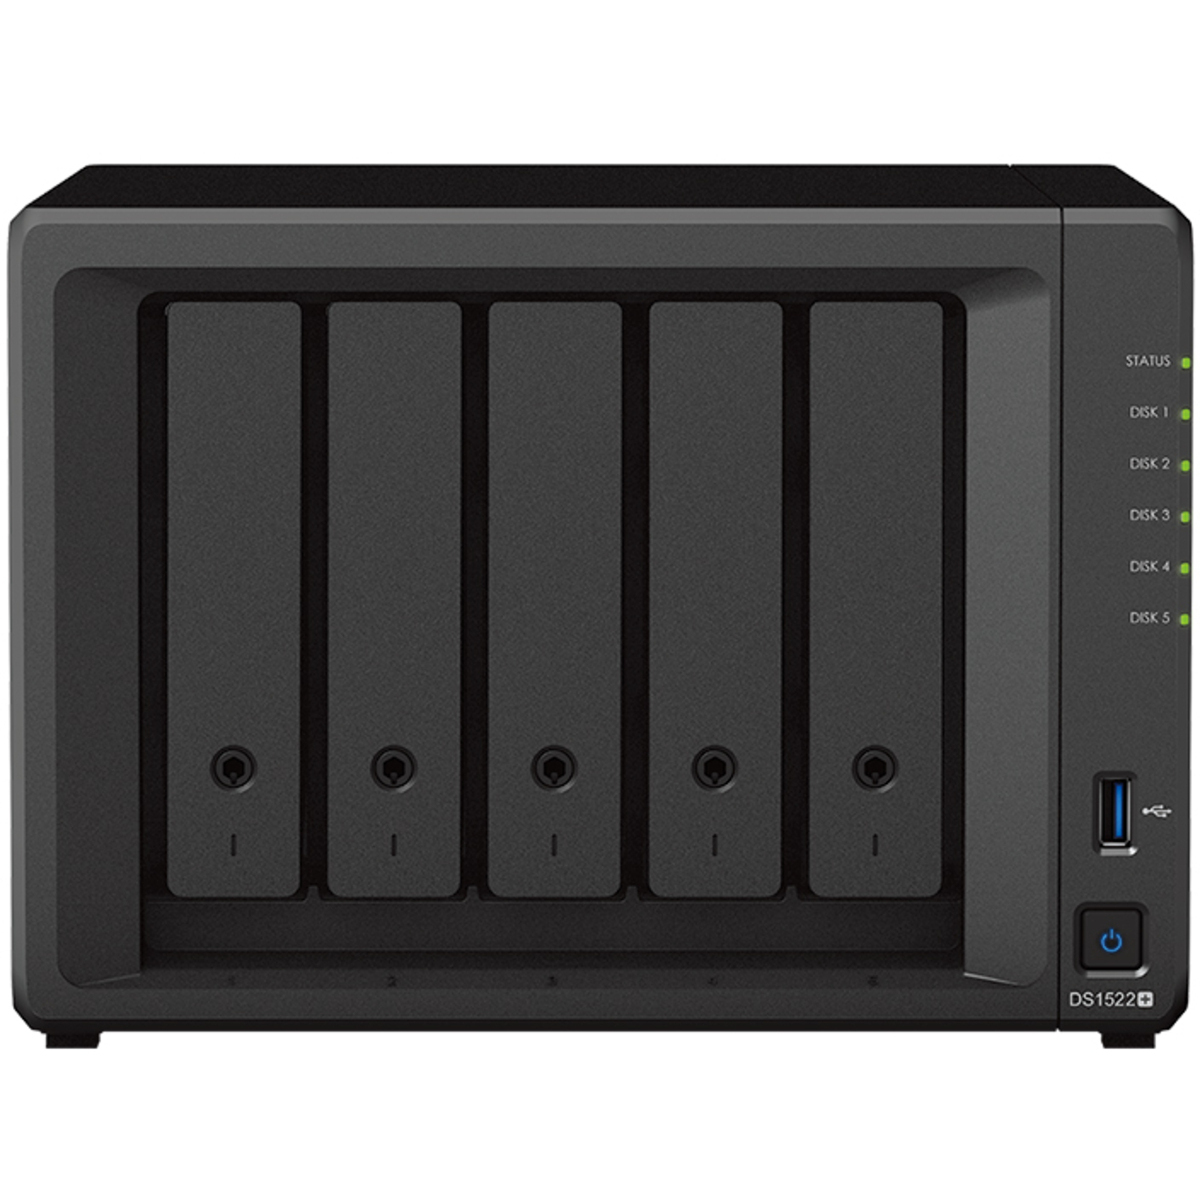 Synology DiskStation DS1522+ 50tb 5-Bay Desktop Multimedia / Power User / Business NAS - Network Attached Storage Device 5x10tb Seagate IronWolf ST10000VN000 3.5 7200rpm SATA 6Gb/s HDD NAS Class Drives Installed - Burn-In Tested - ON SALE DiskStation DS1522+